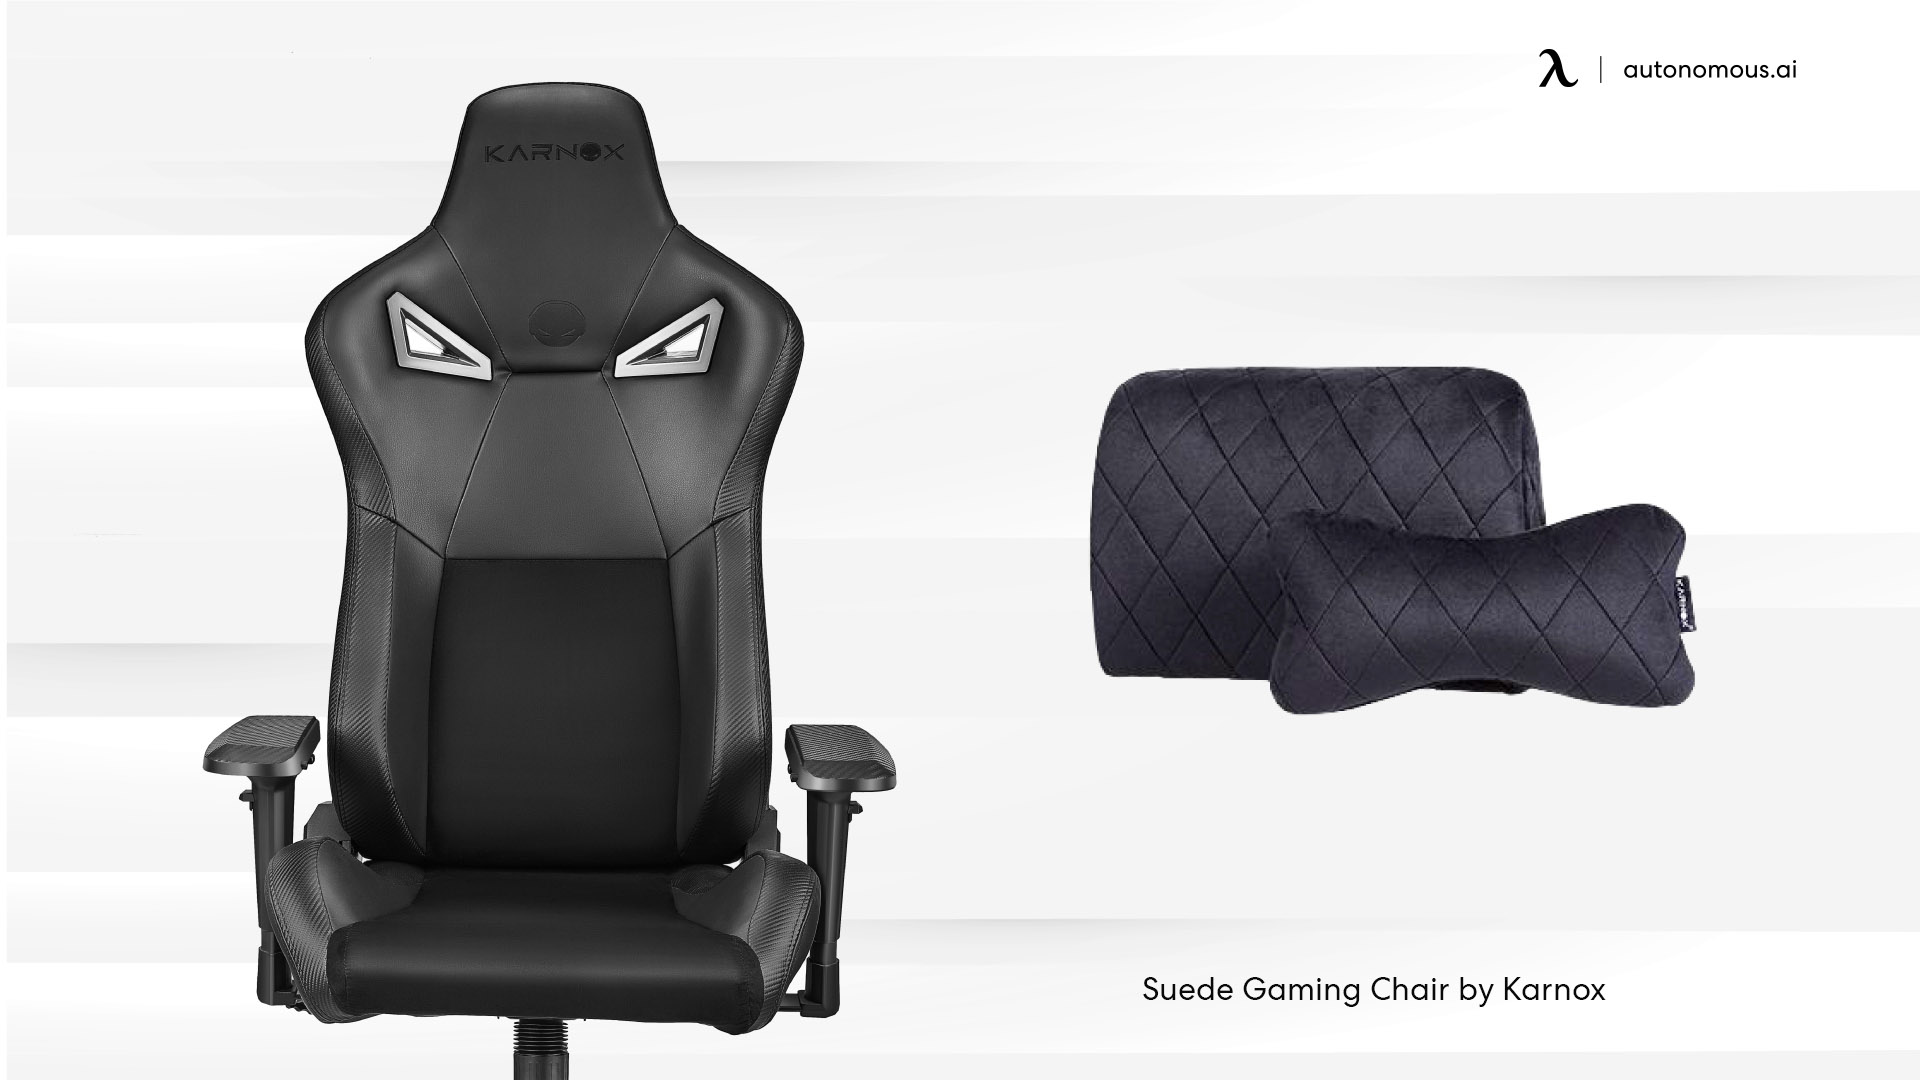 Suede gaming chair by Karnox